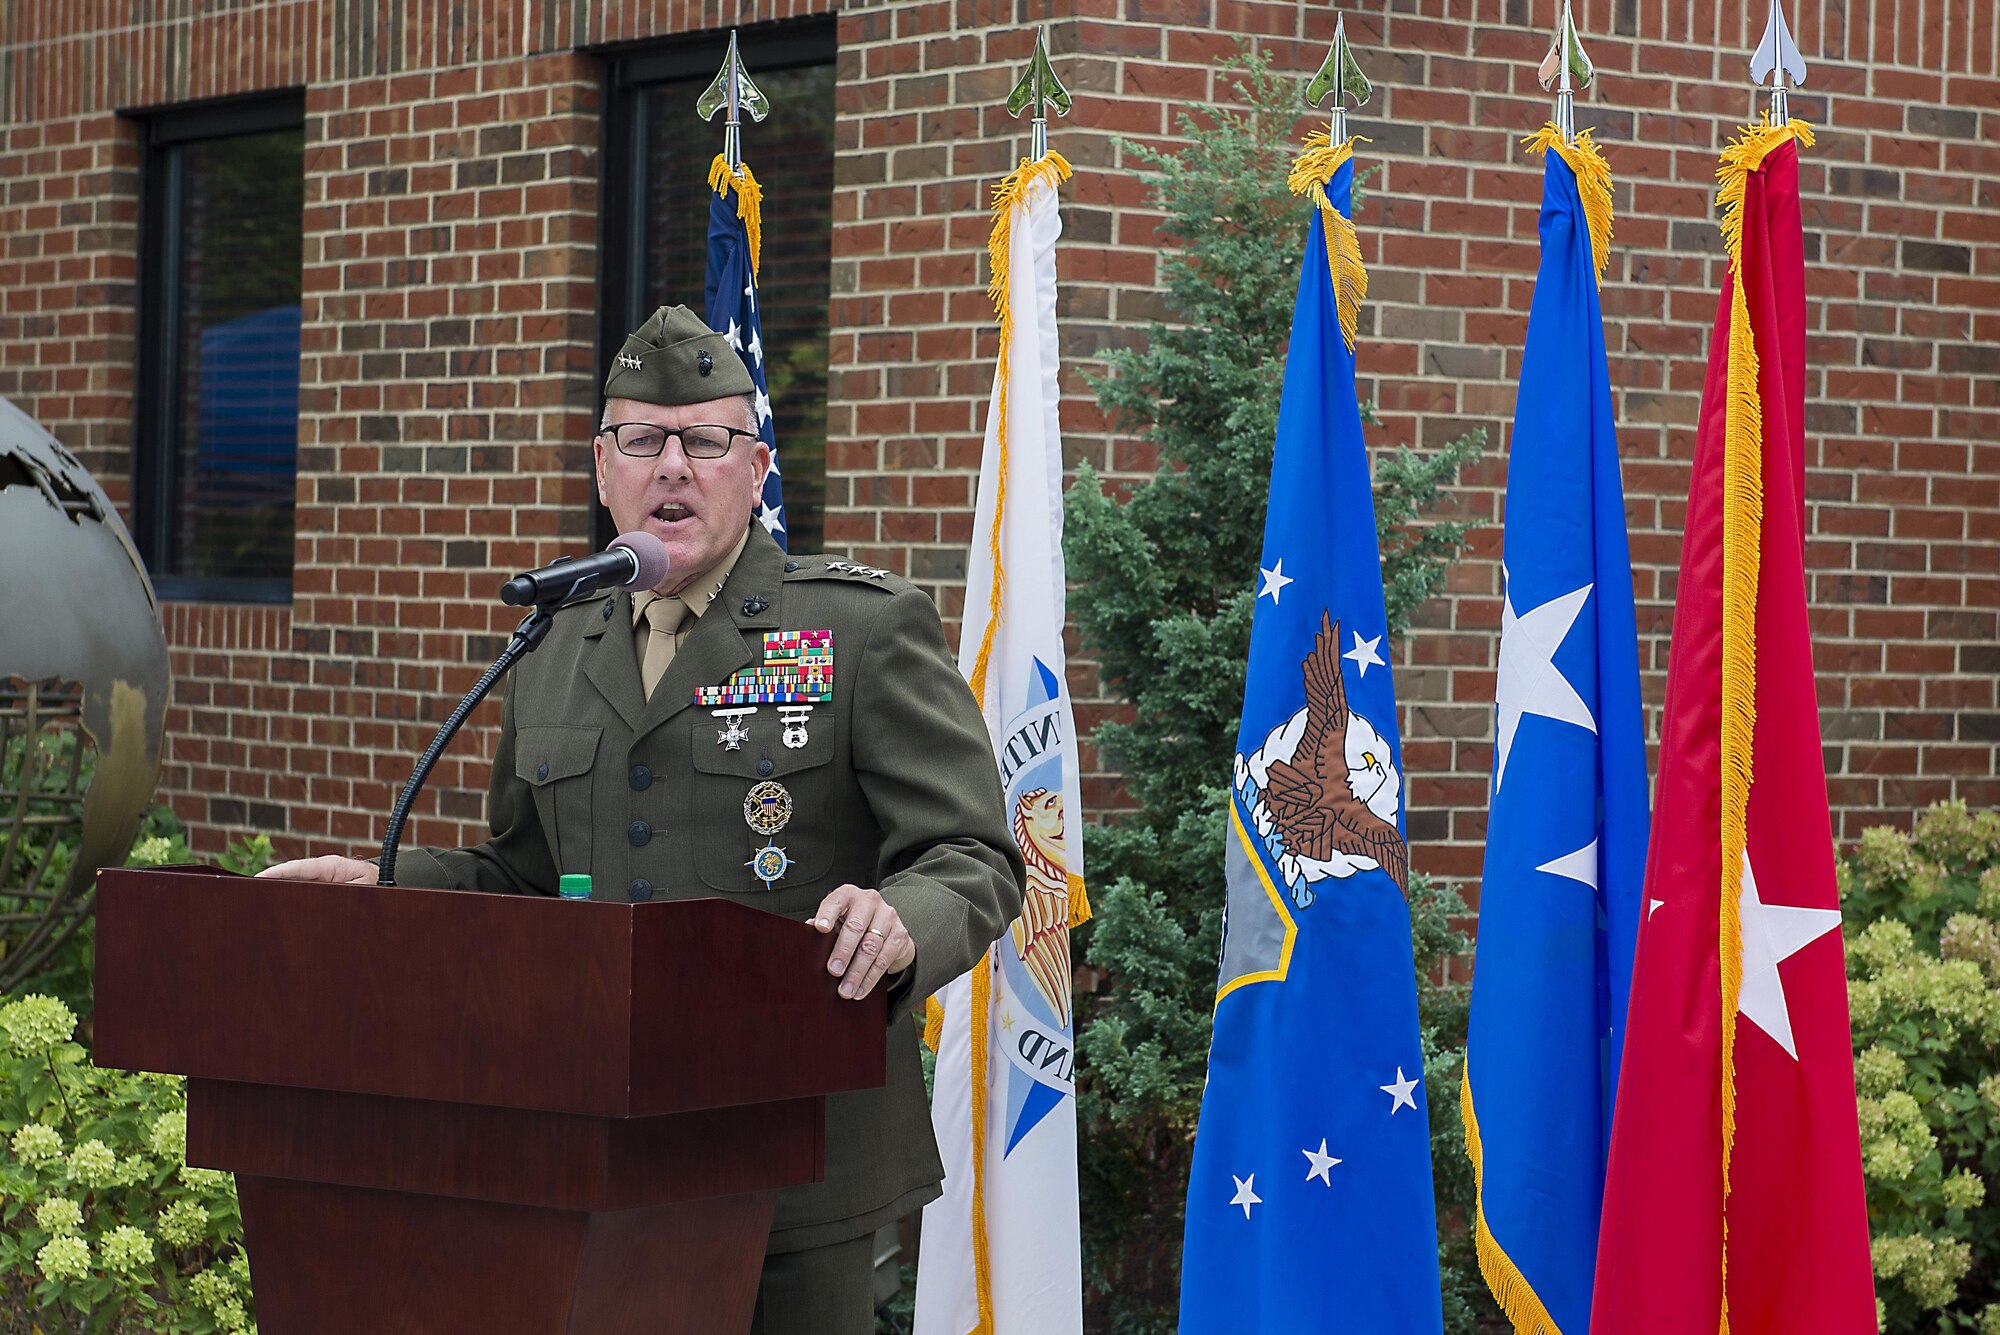 Marine Lt. Gen. John J. Broadmeadow, U.S. Transportation Command deputy commander, discusses Gen. Duane H. Cassidy’s impact of USTRANSCOM during a dedication ceremony renaming the Global Reach and Planning Center to the Gen. Duane H. Cassidy Conference Center, at Scott Air Force Base, Ill., Oct. 6, 2017.